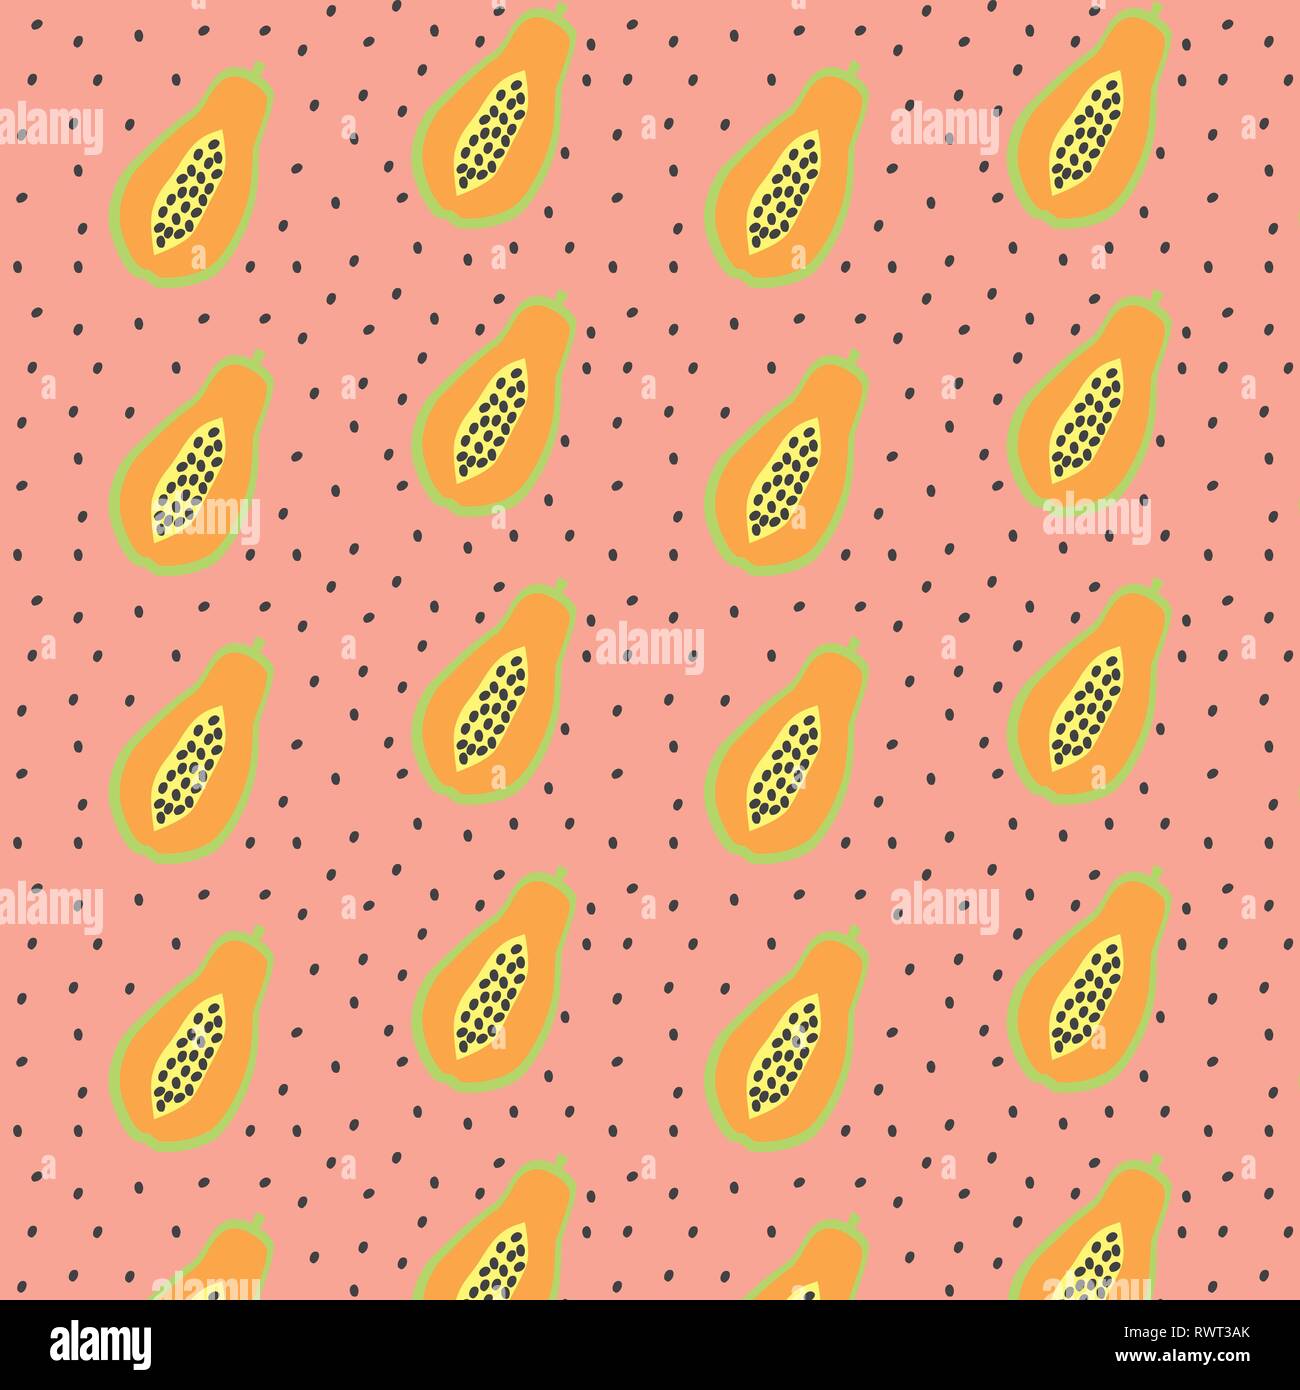 Papaya vector pattern on a pink dotted background Stock Vector